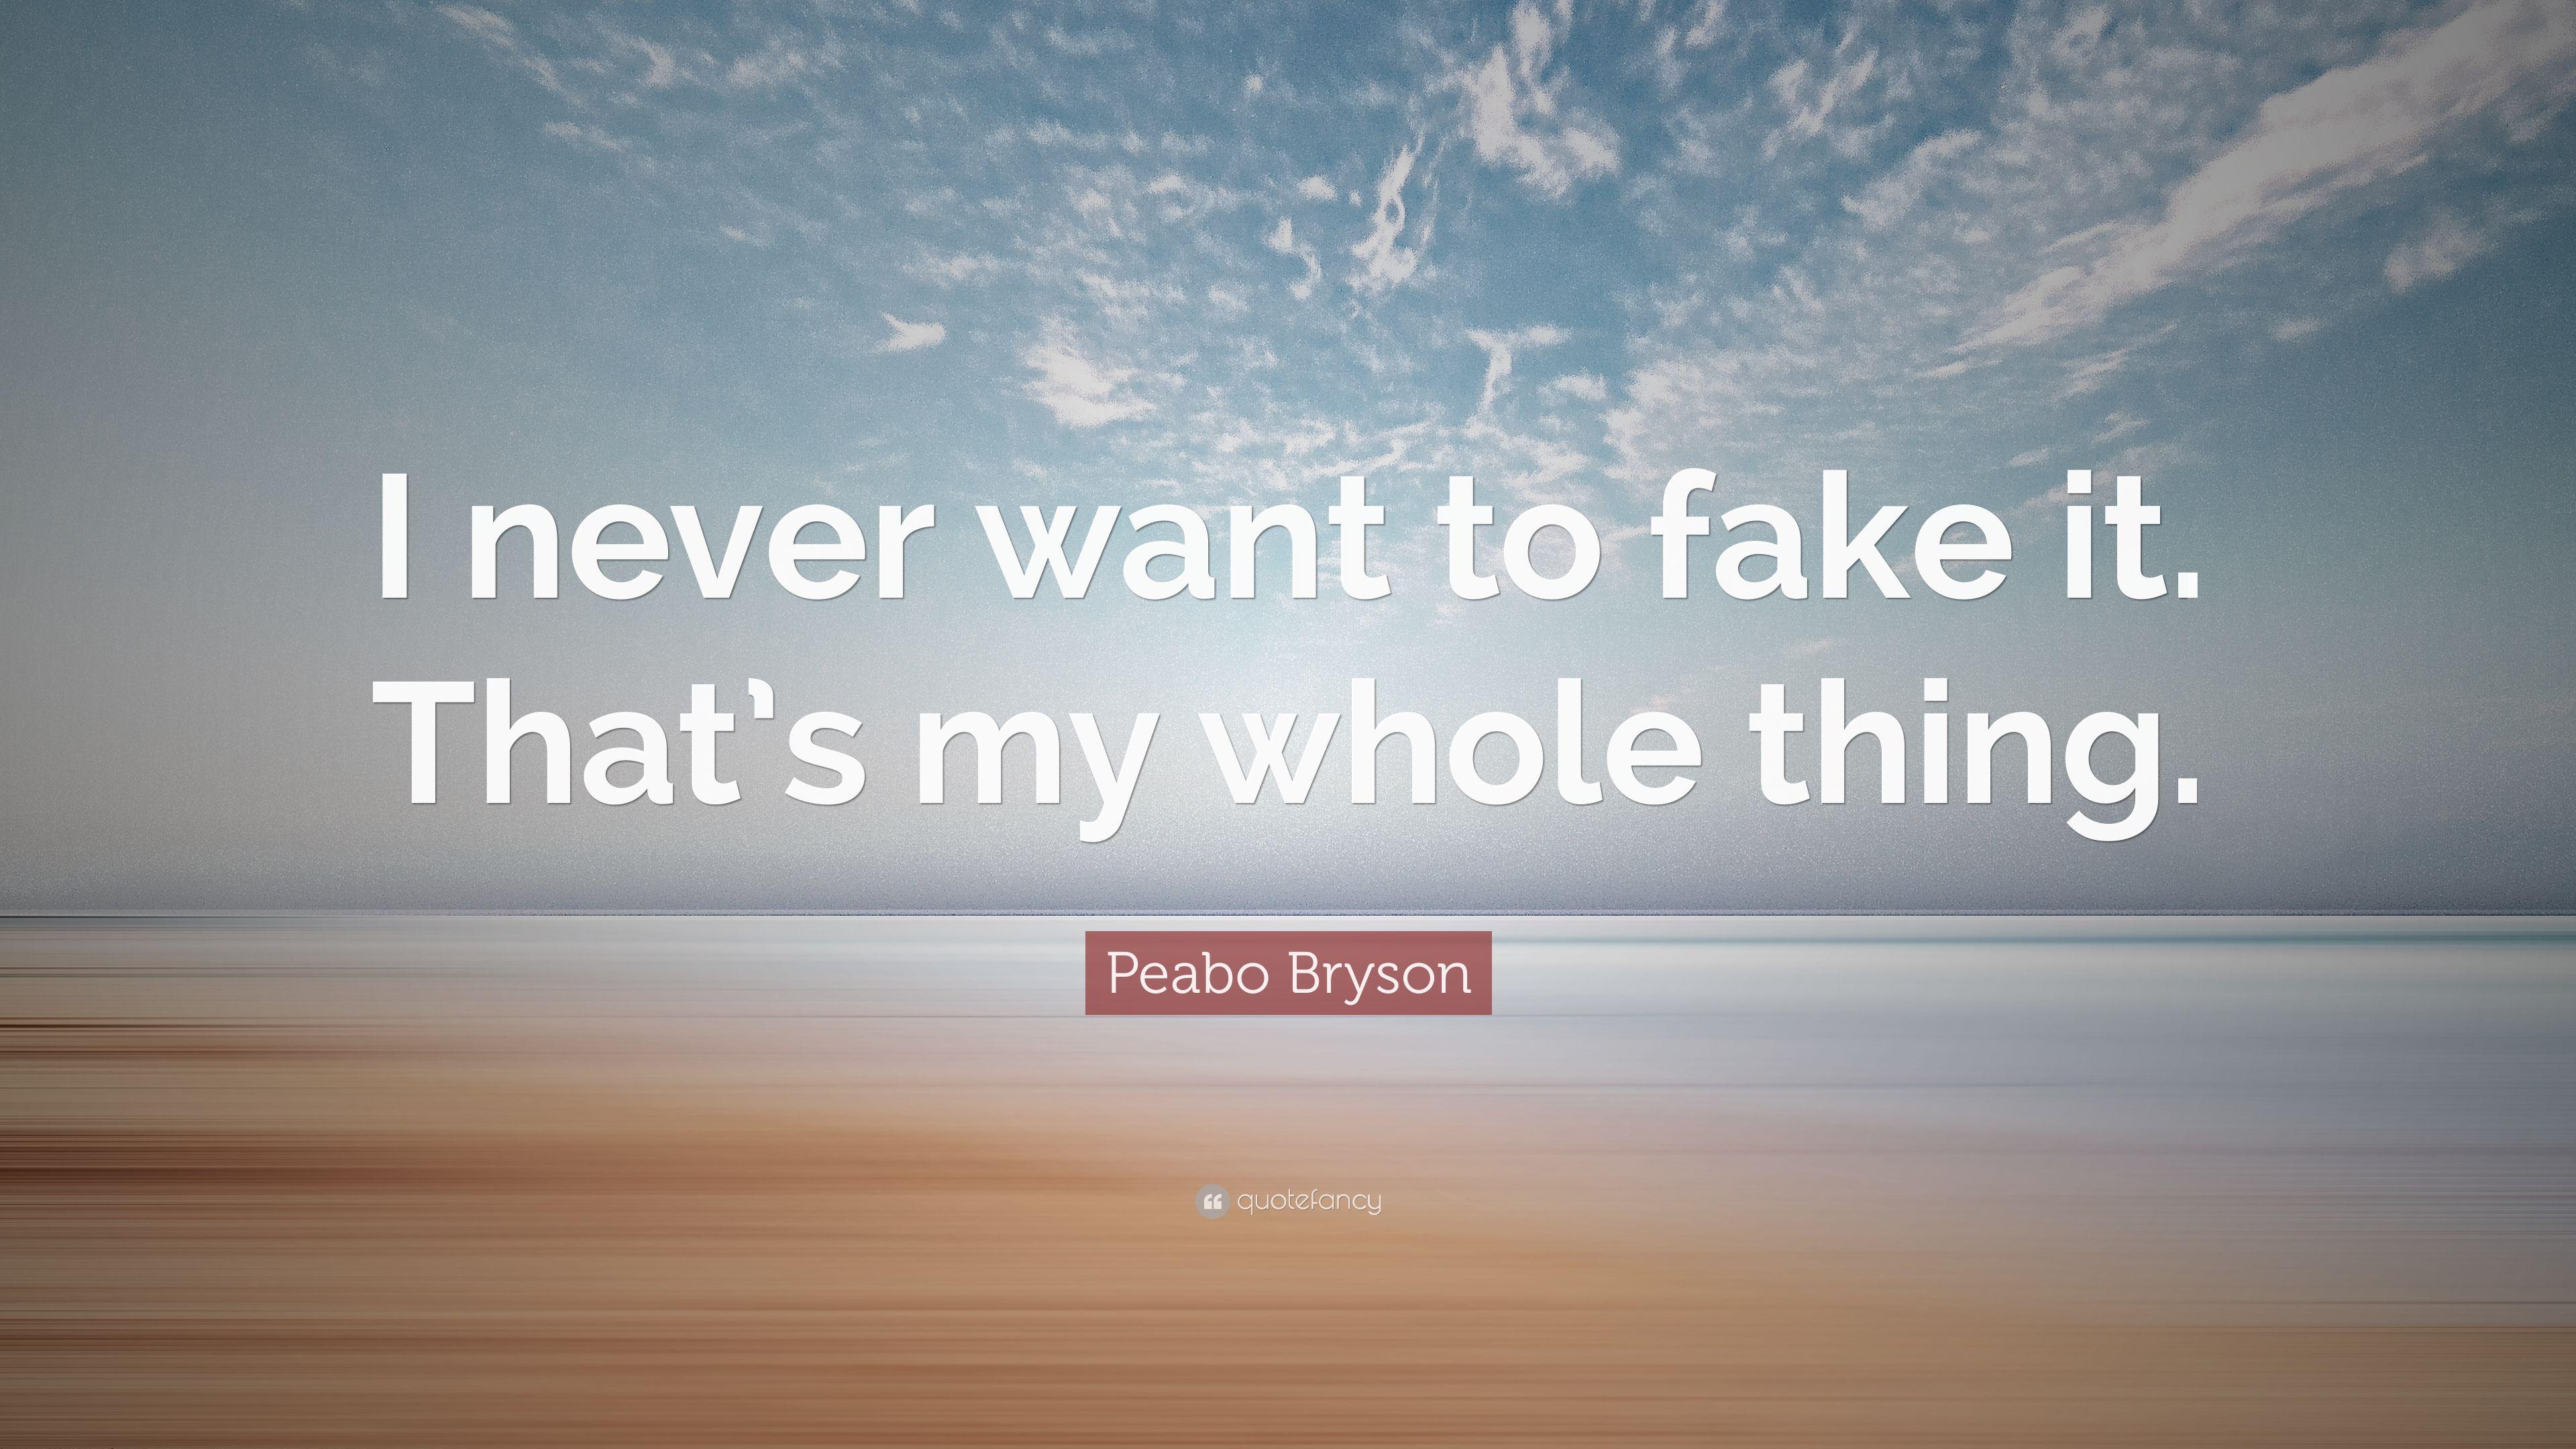 Peabo Bryson Quote: “I never want to fake it. That's my whole thing